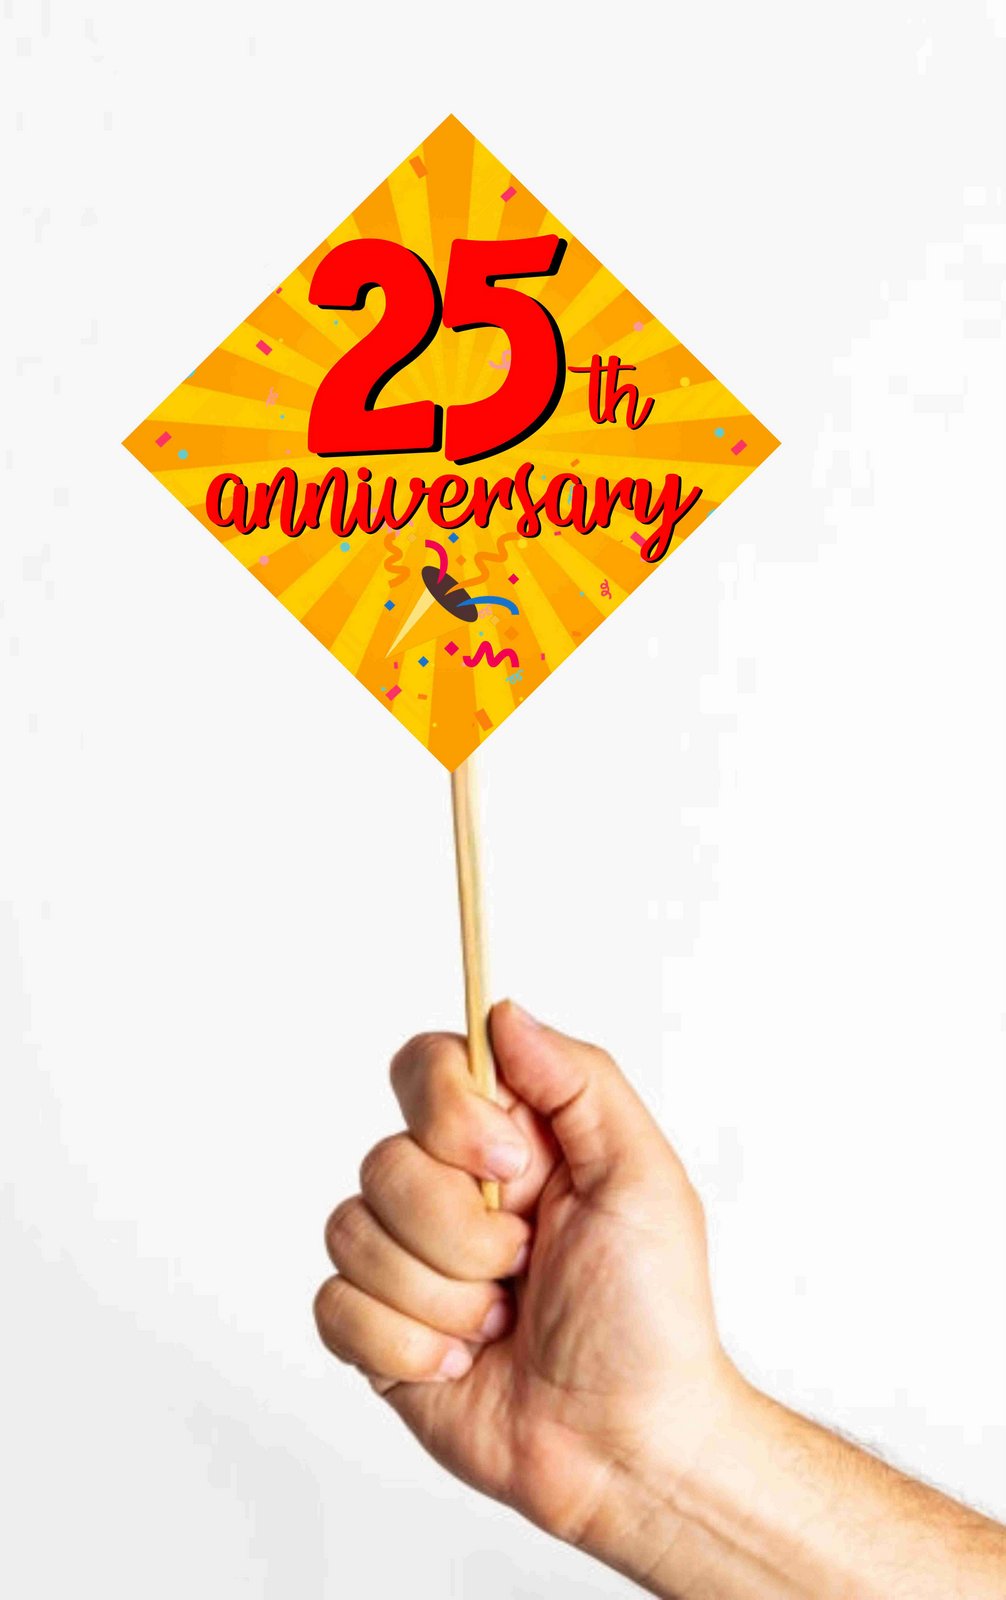 25th Anniversary Theme Props Anniversary Decoration Backdrop Photo Shoot, Photo Booth Party Item